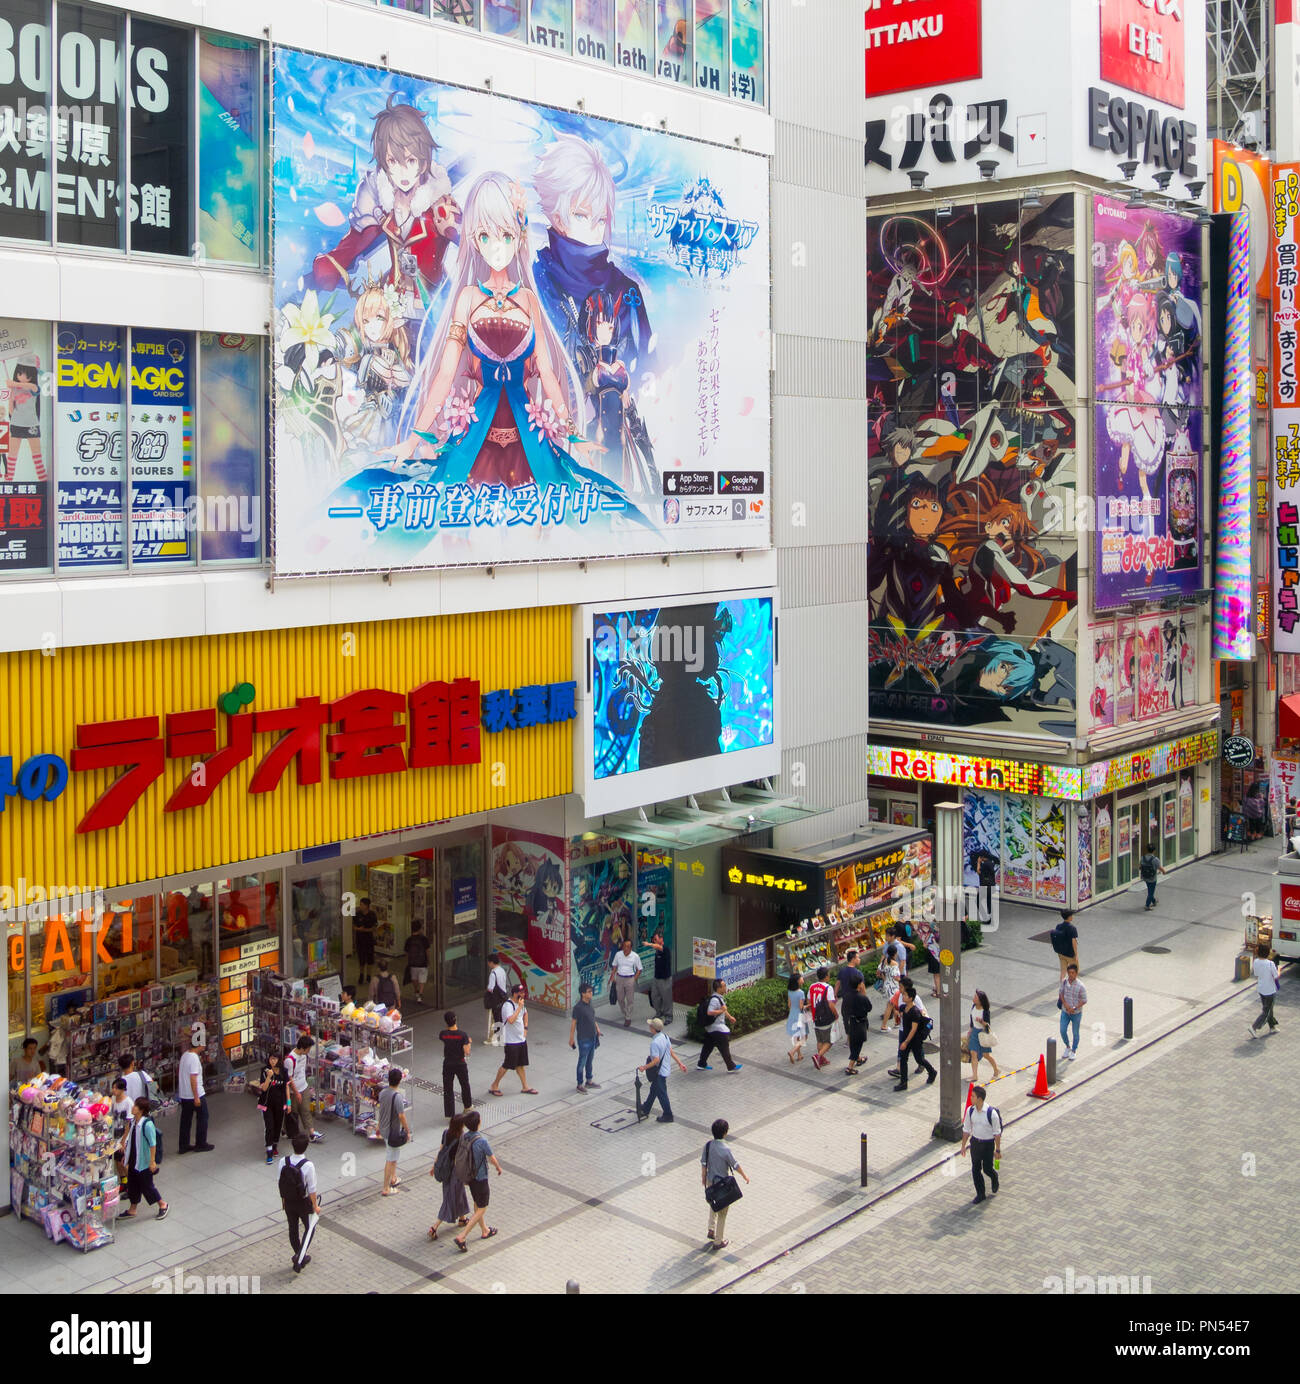 A view of tourists, anime bookshops and signs in the Akihabara district of Tokyo, Japan. Stock Photo